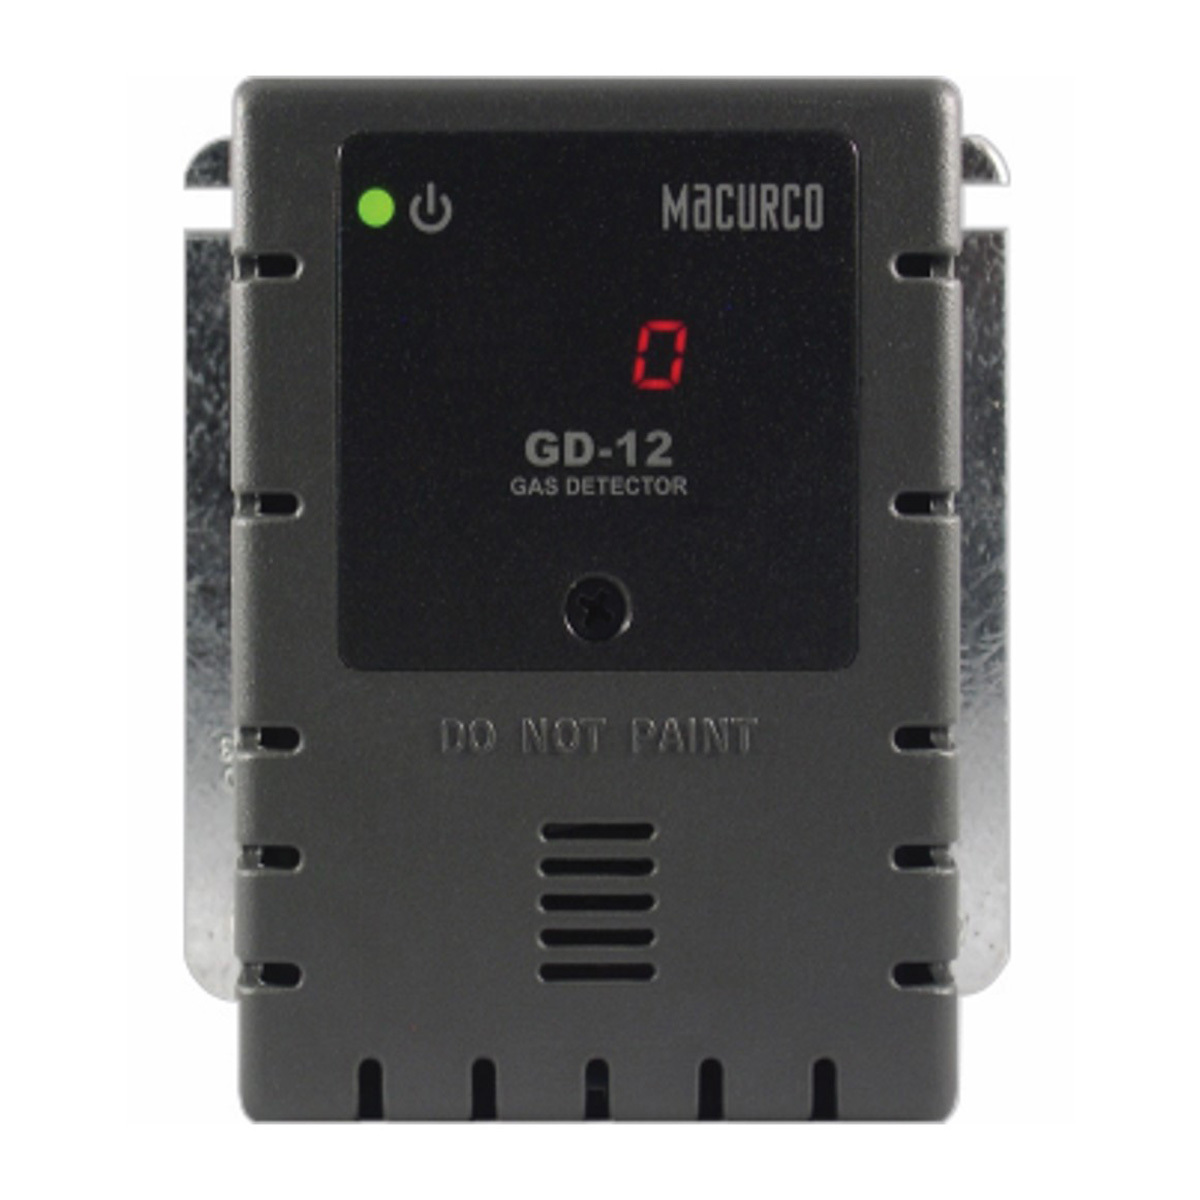 Macurco™ GD-12 Fixed Combustible Gas, Propane, Methane And Hydrogen Detector (Line Voltage Controller Transducer)